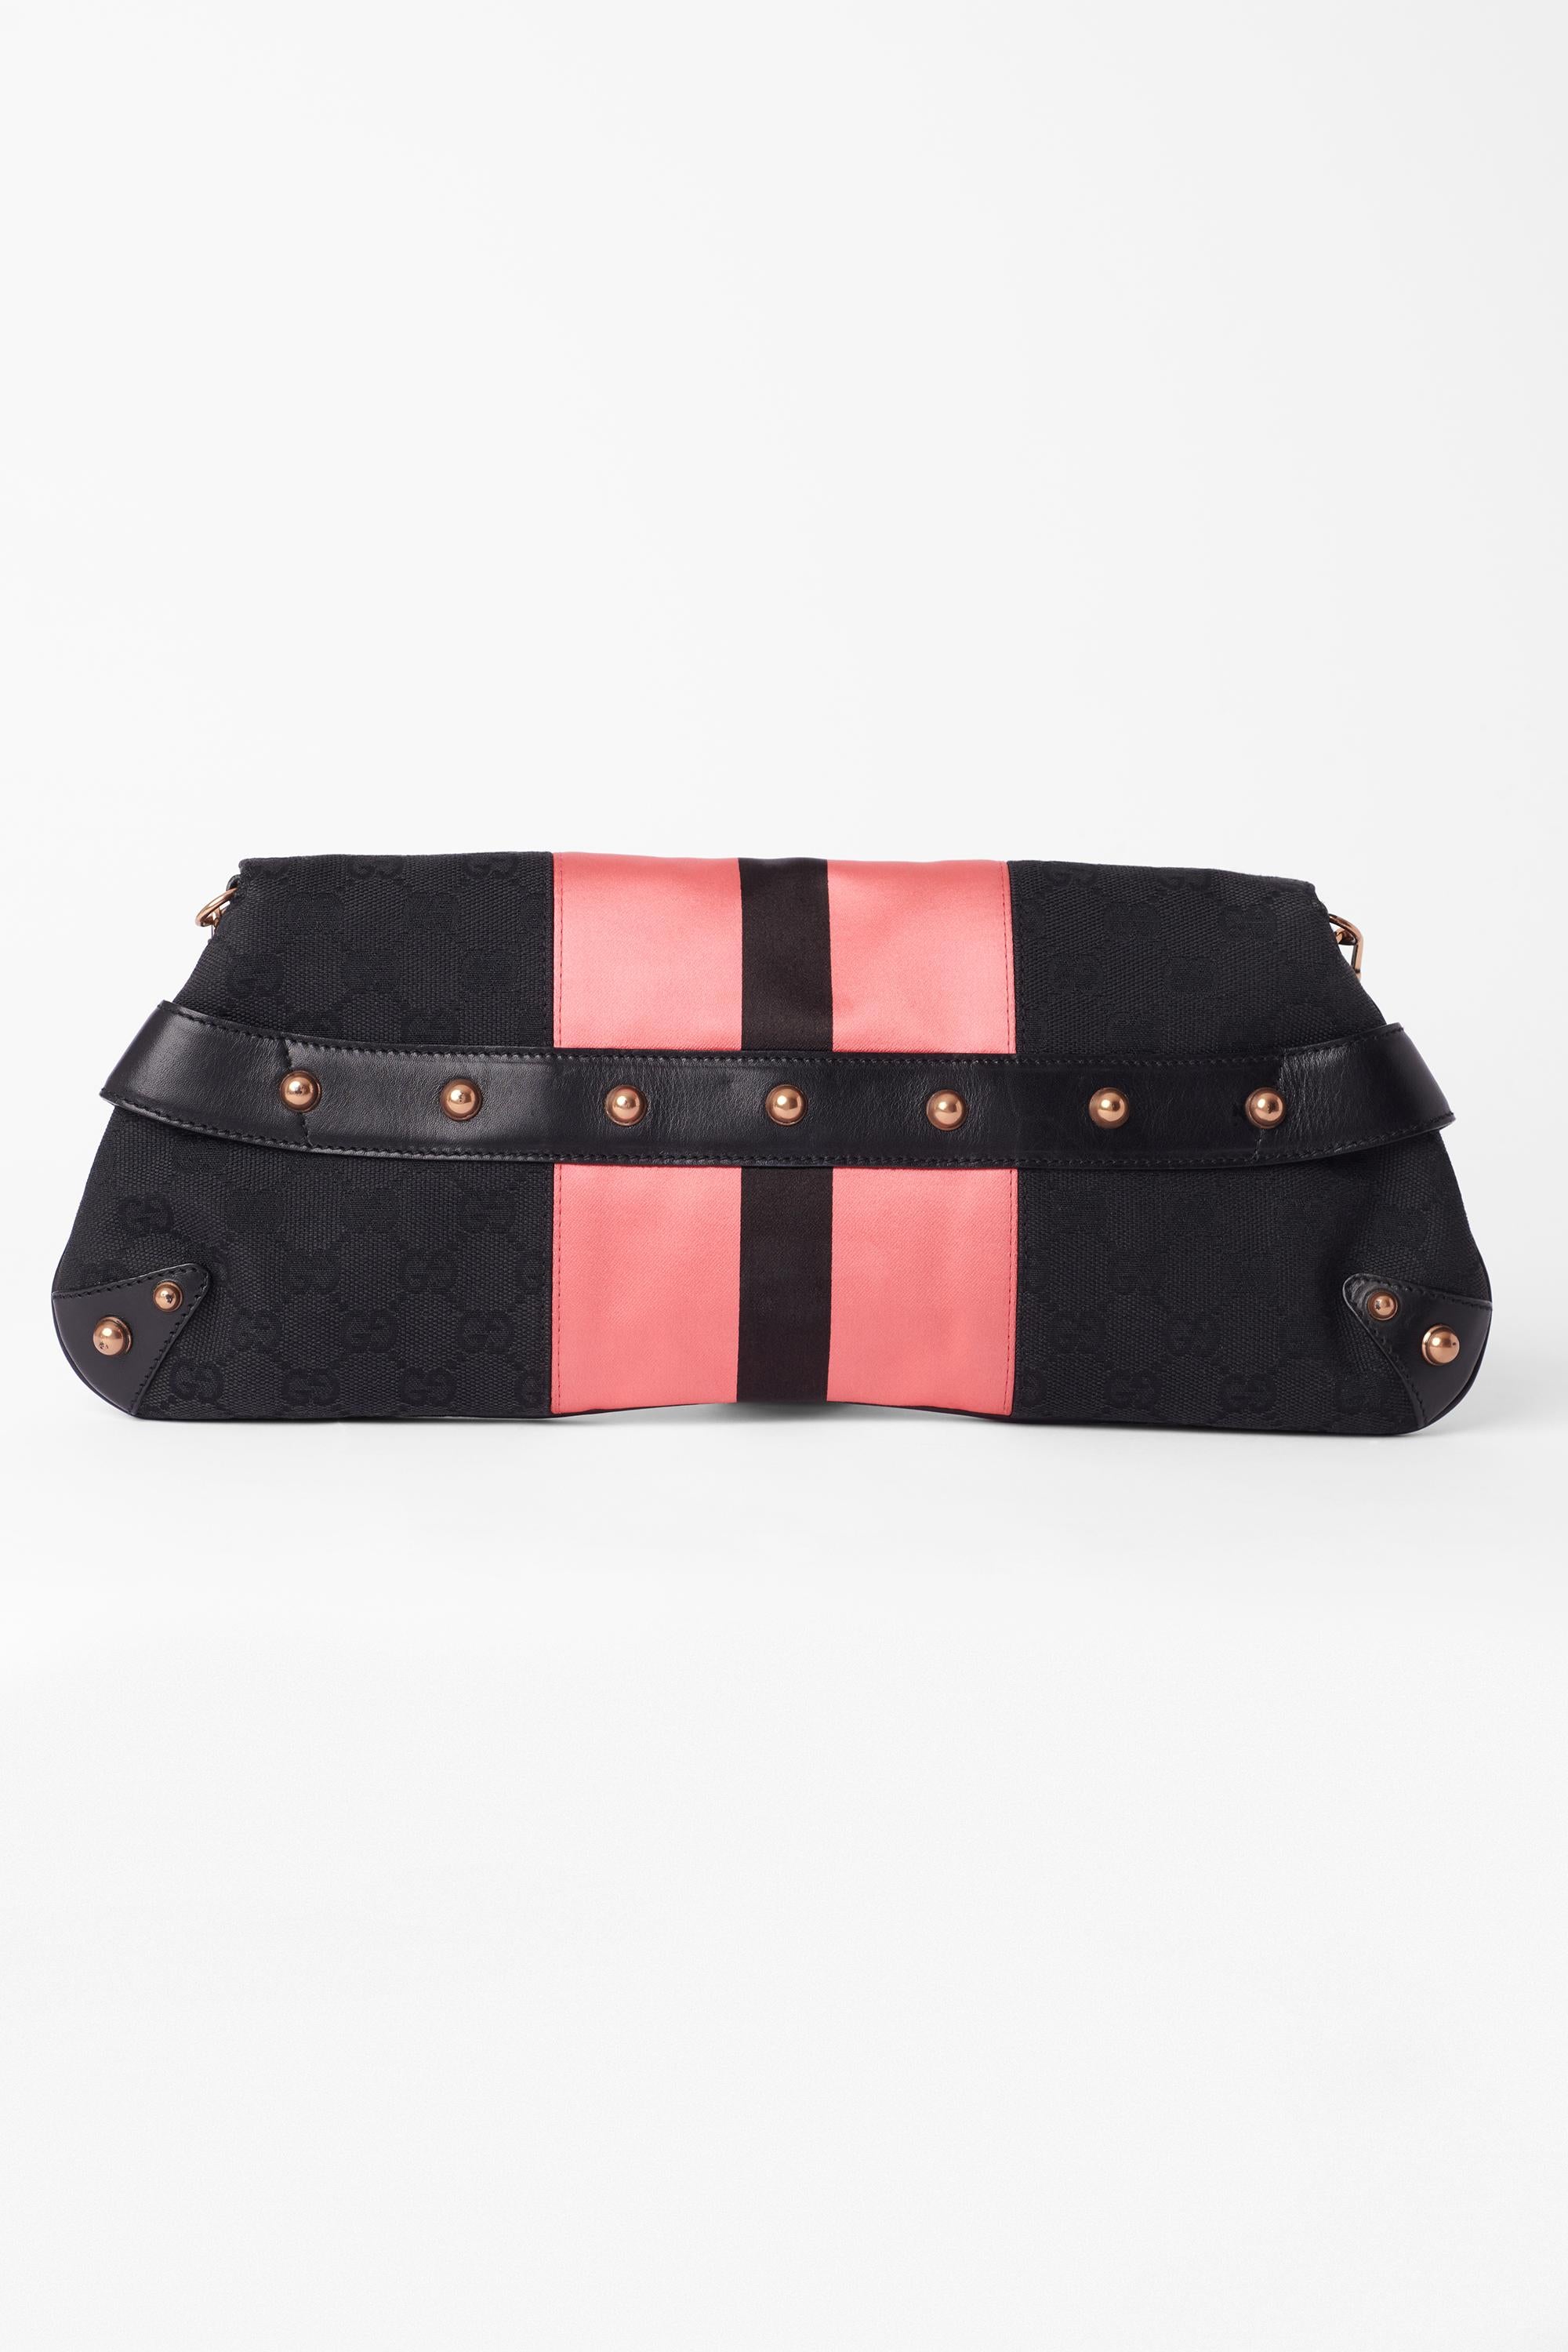 S/S 2004 Runway Black&Pink GG Canvas Horsebit Clutch In Excellent Condition For Sale In London, GB